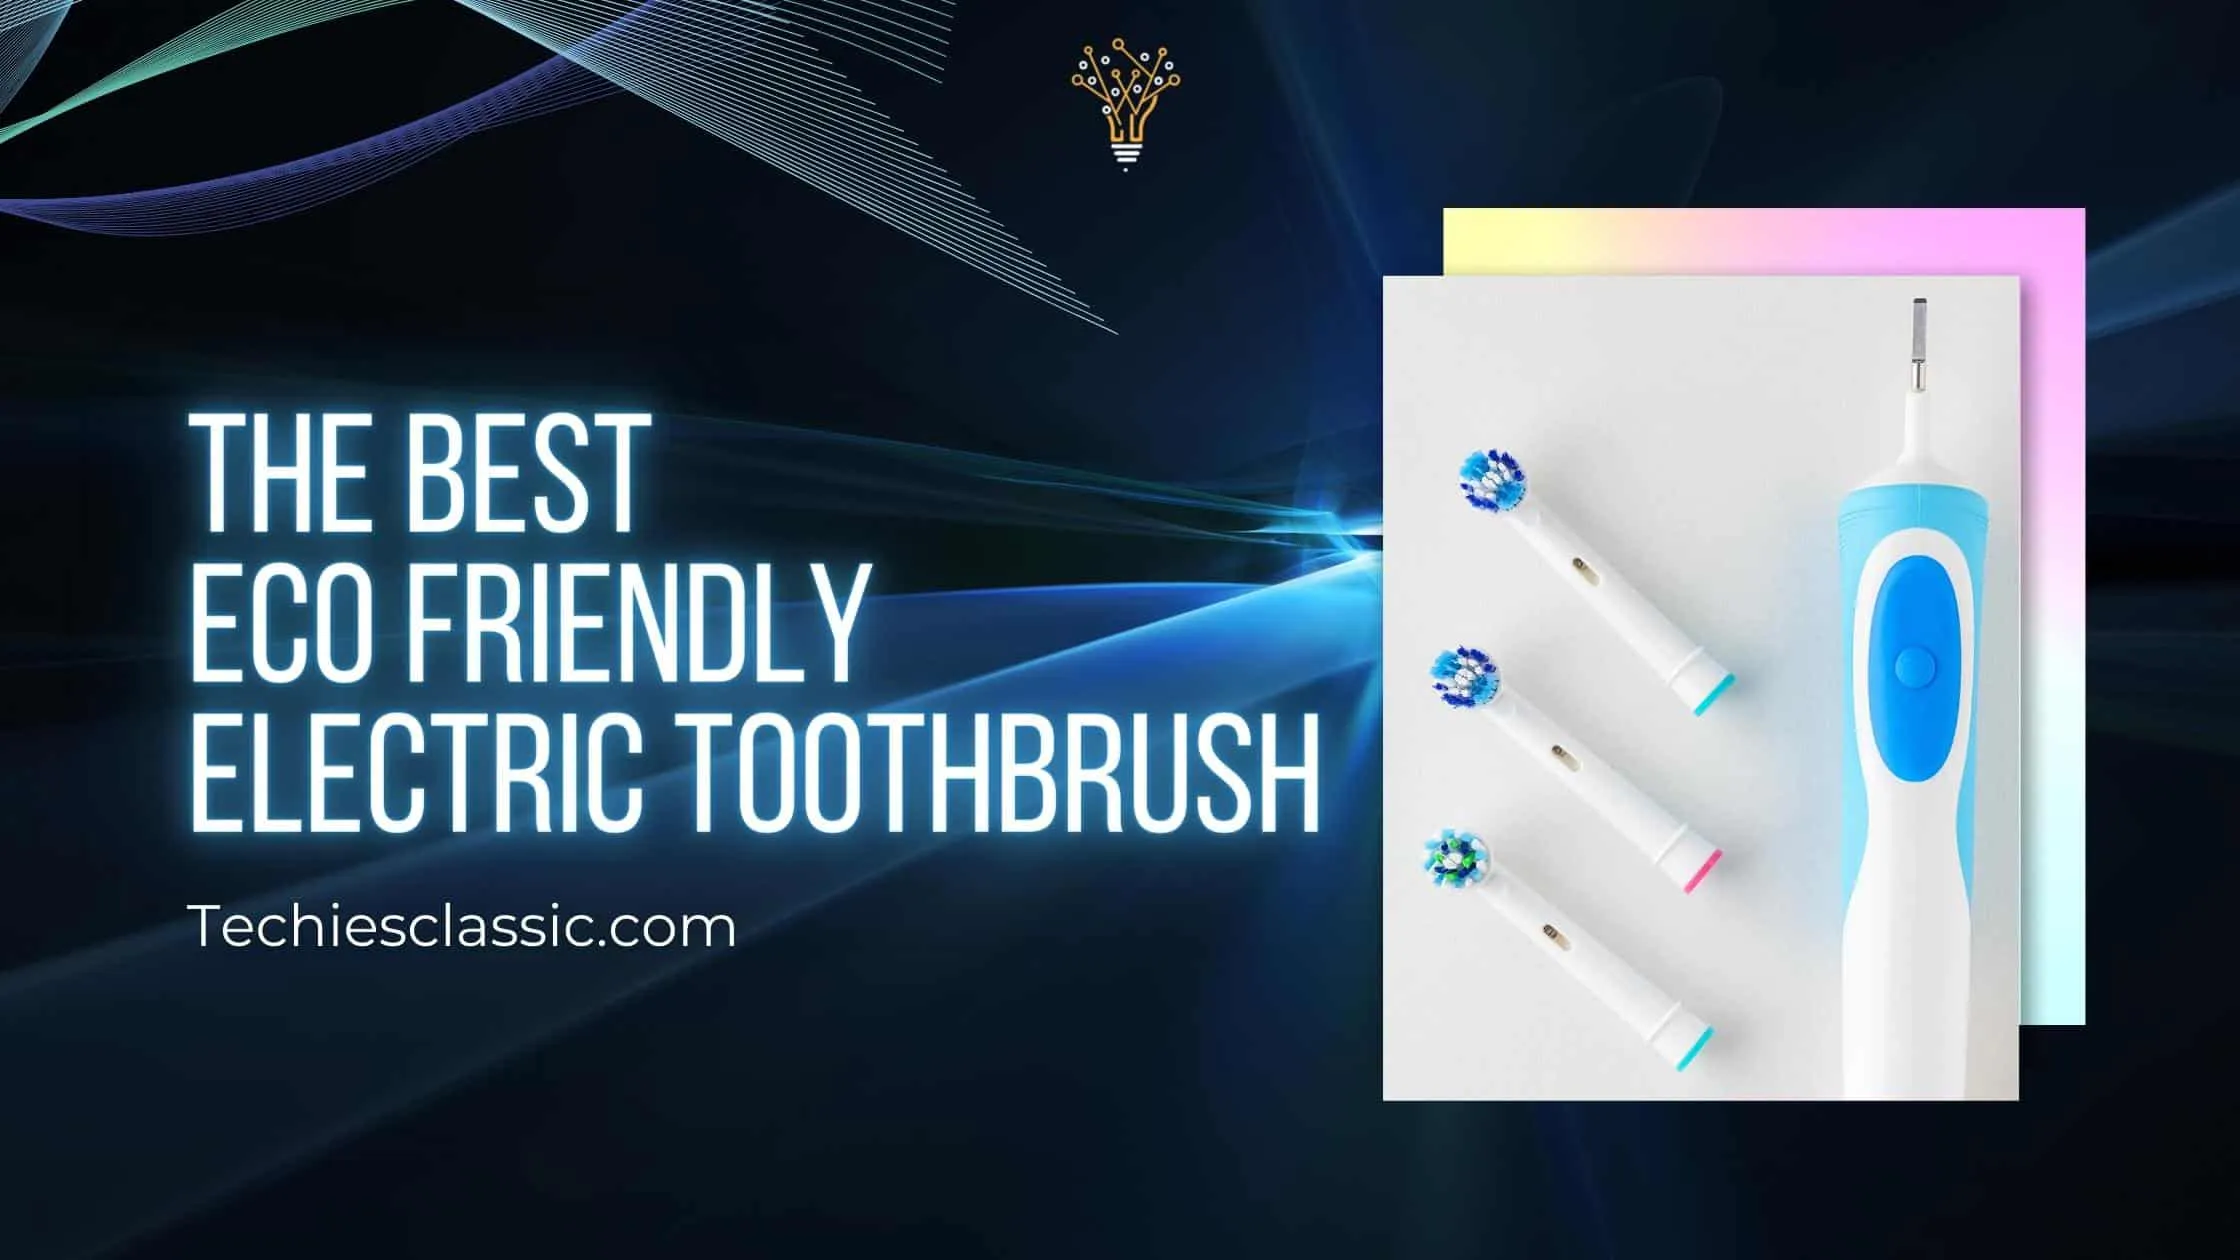 10 Best Eco Friendly Electric Toothbrush Reviews in 2022